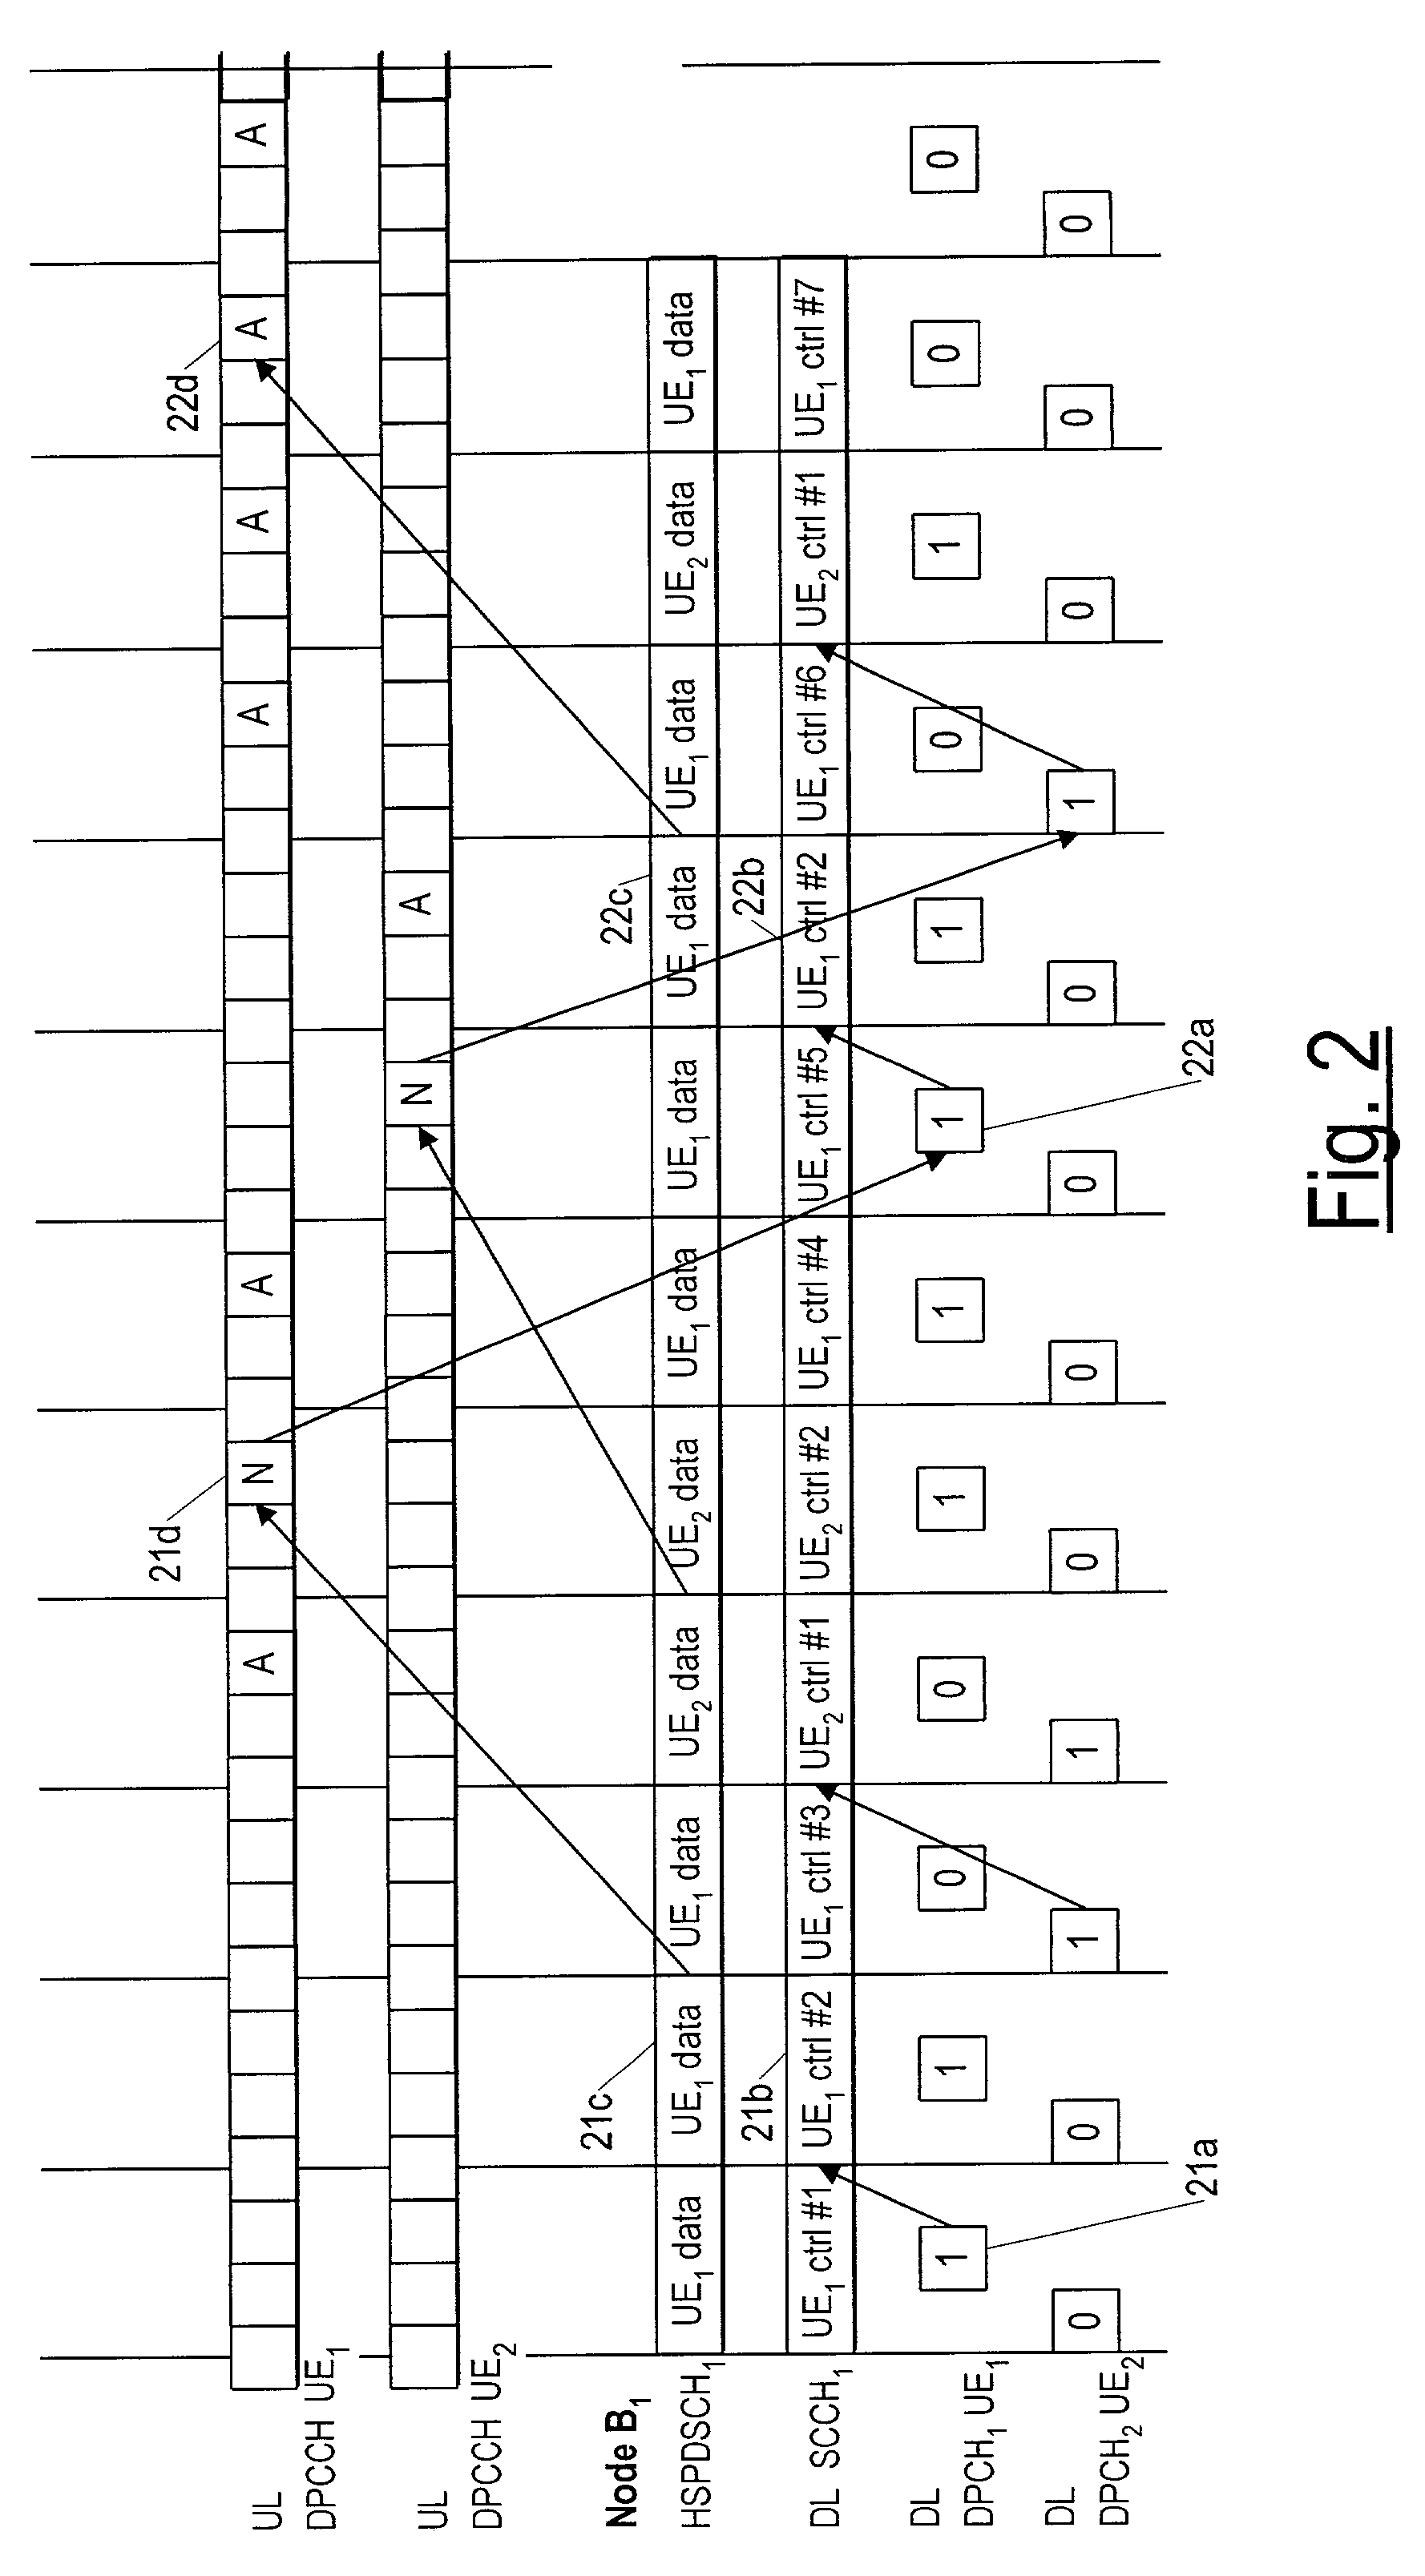 Hybrid automatic repeat request (HARQ) scheme with in-sequence delivery of packets